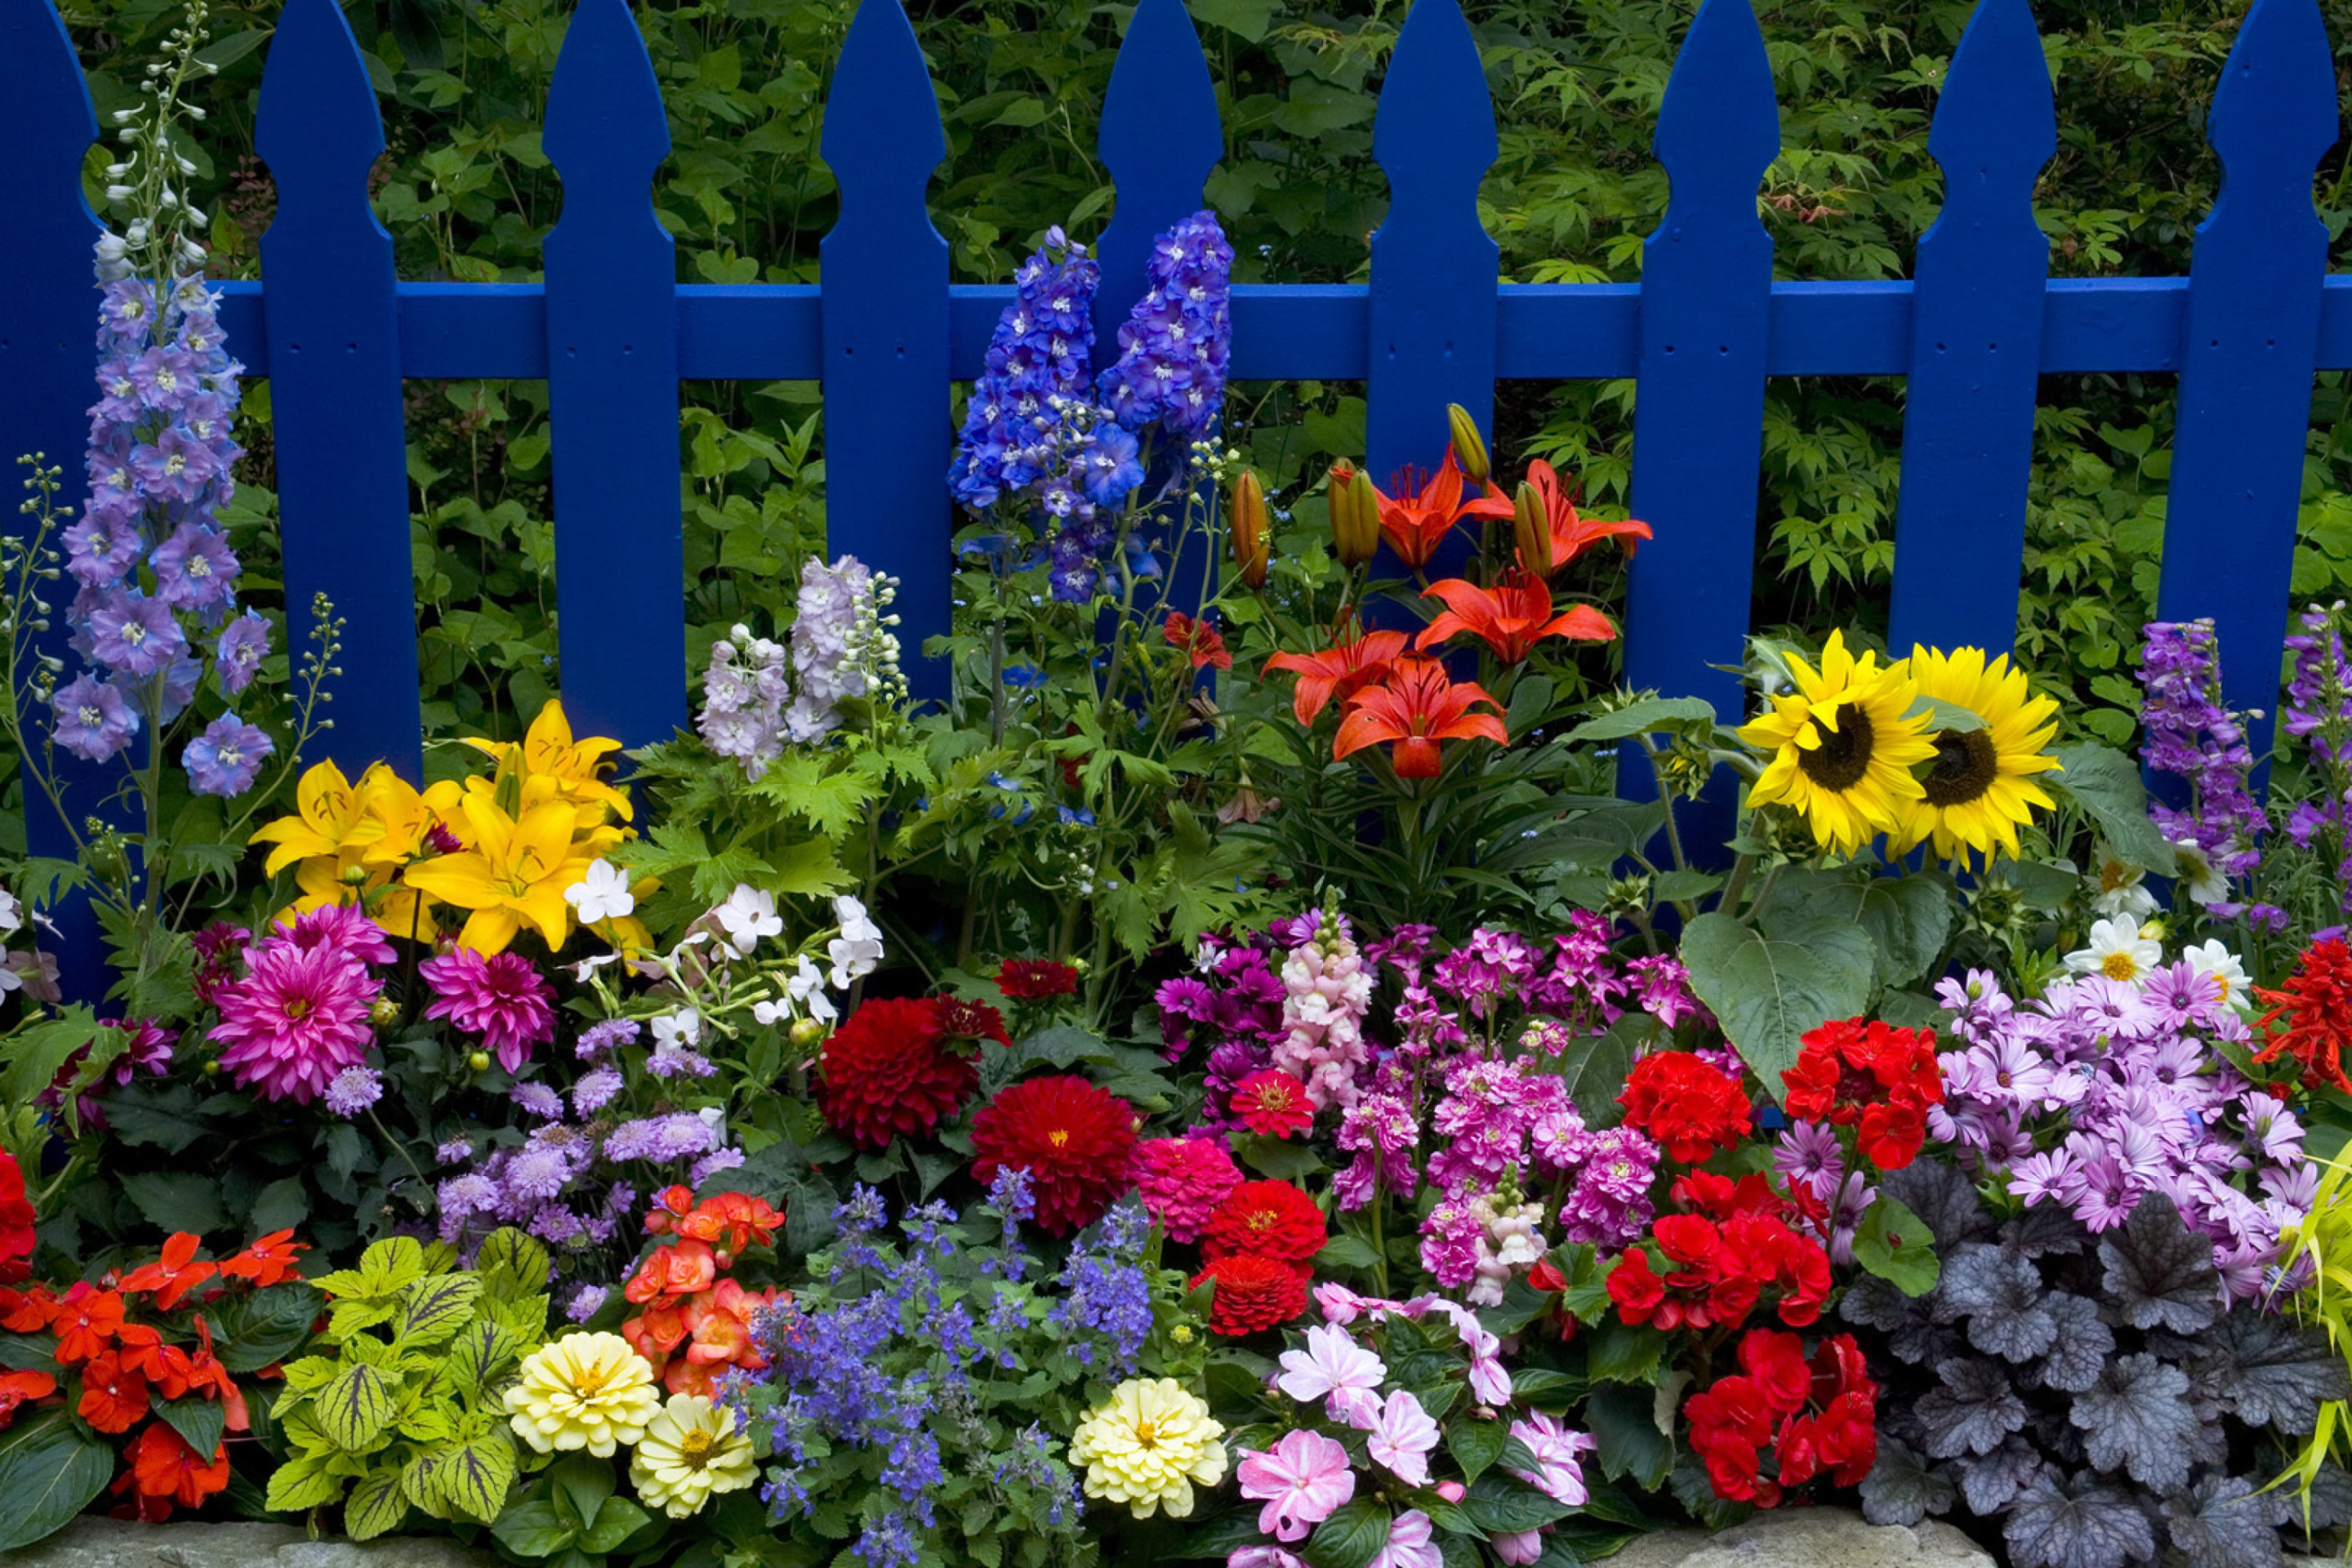 Garden Flowers In Front Of Bright Blue Fence wallpaper 2880x1920